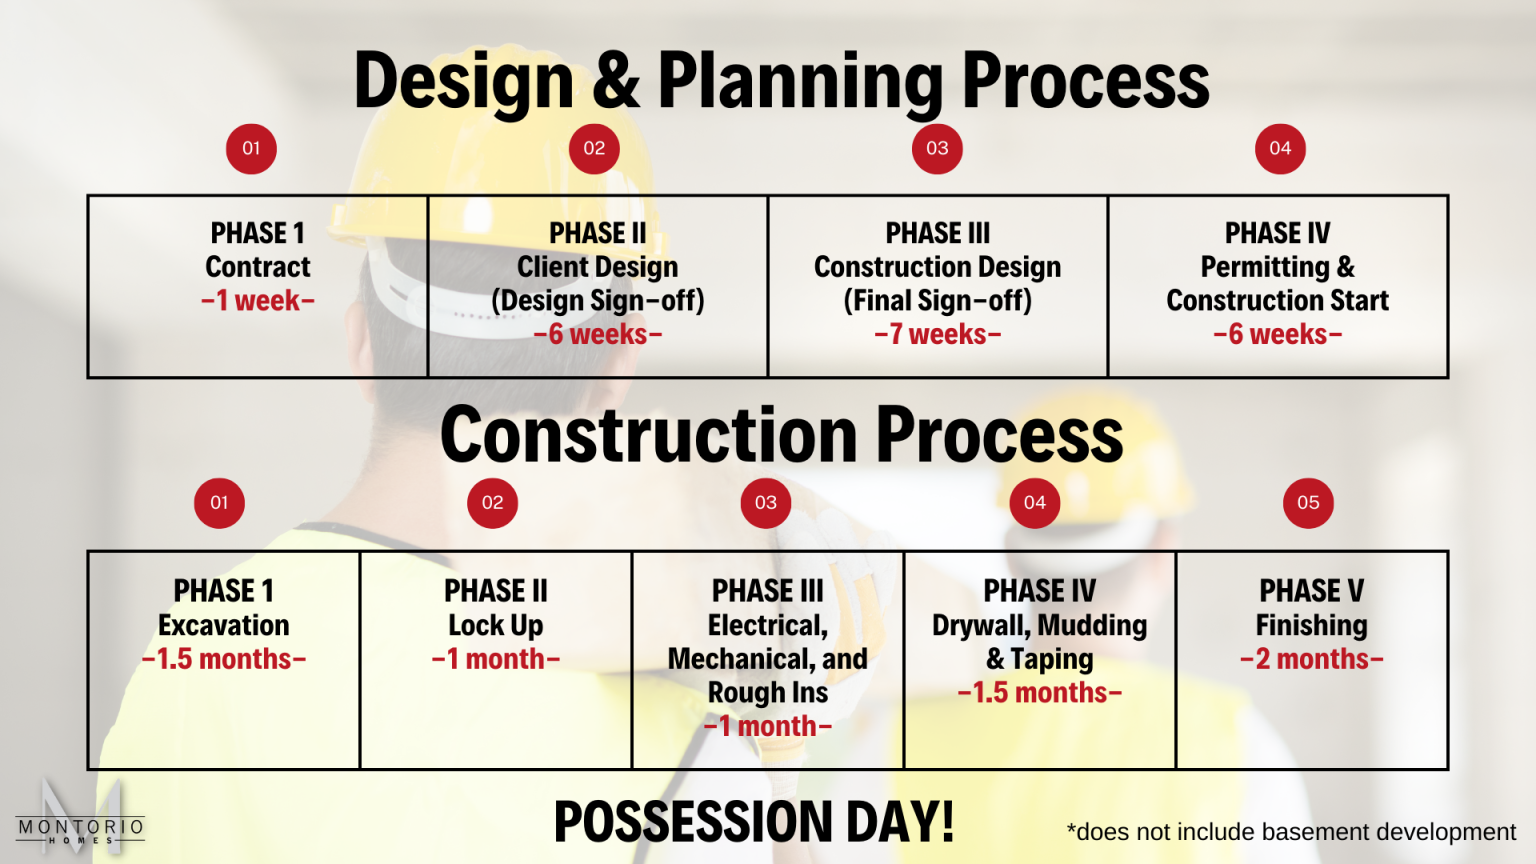 Building Construction Process From Start To Finish